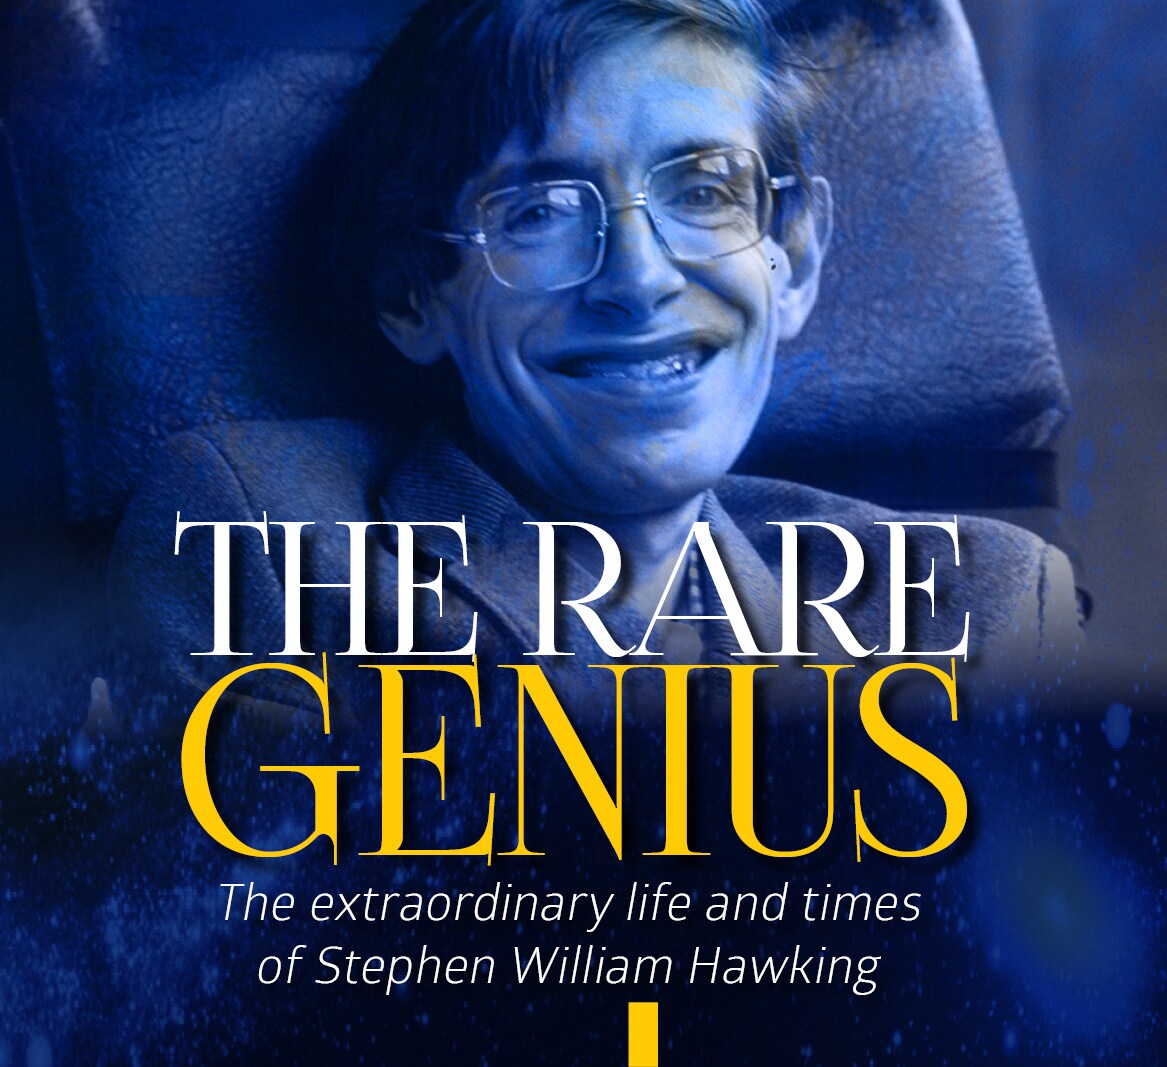 Here's a look at the rare genius Stephen Hawking's ...